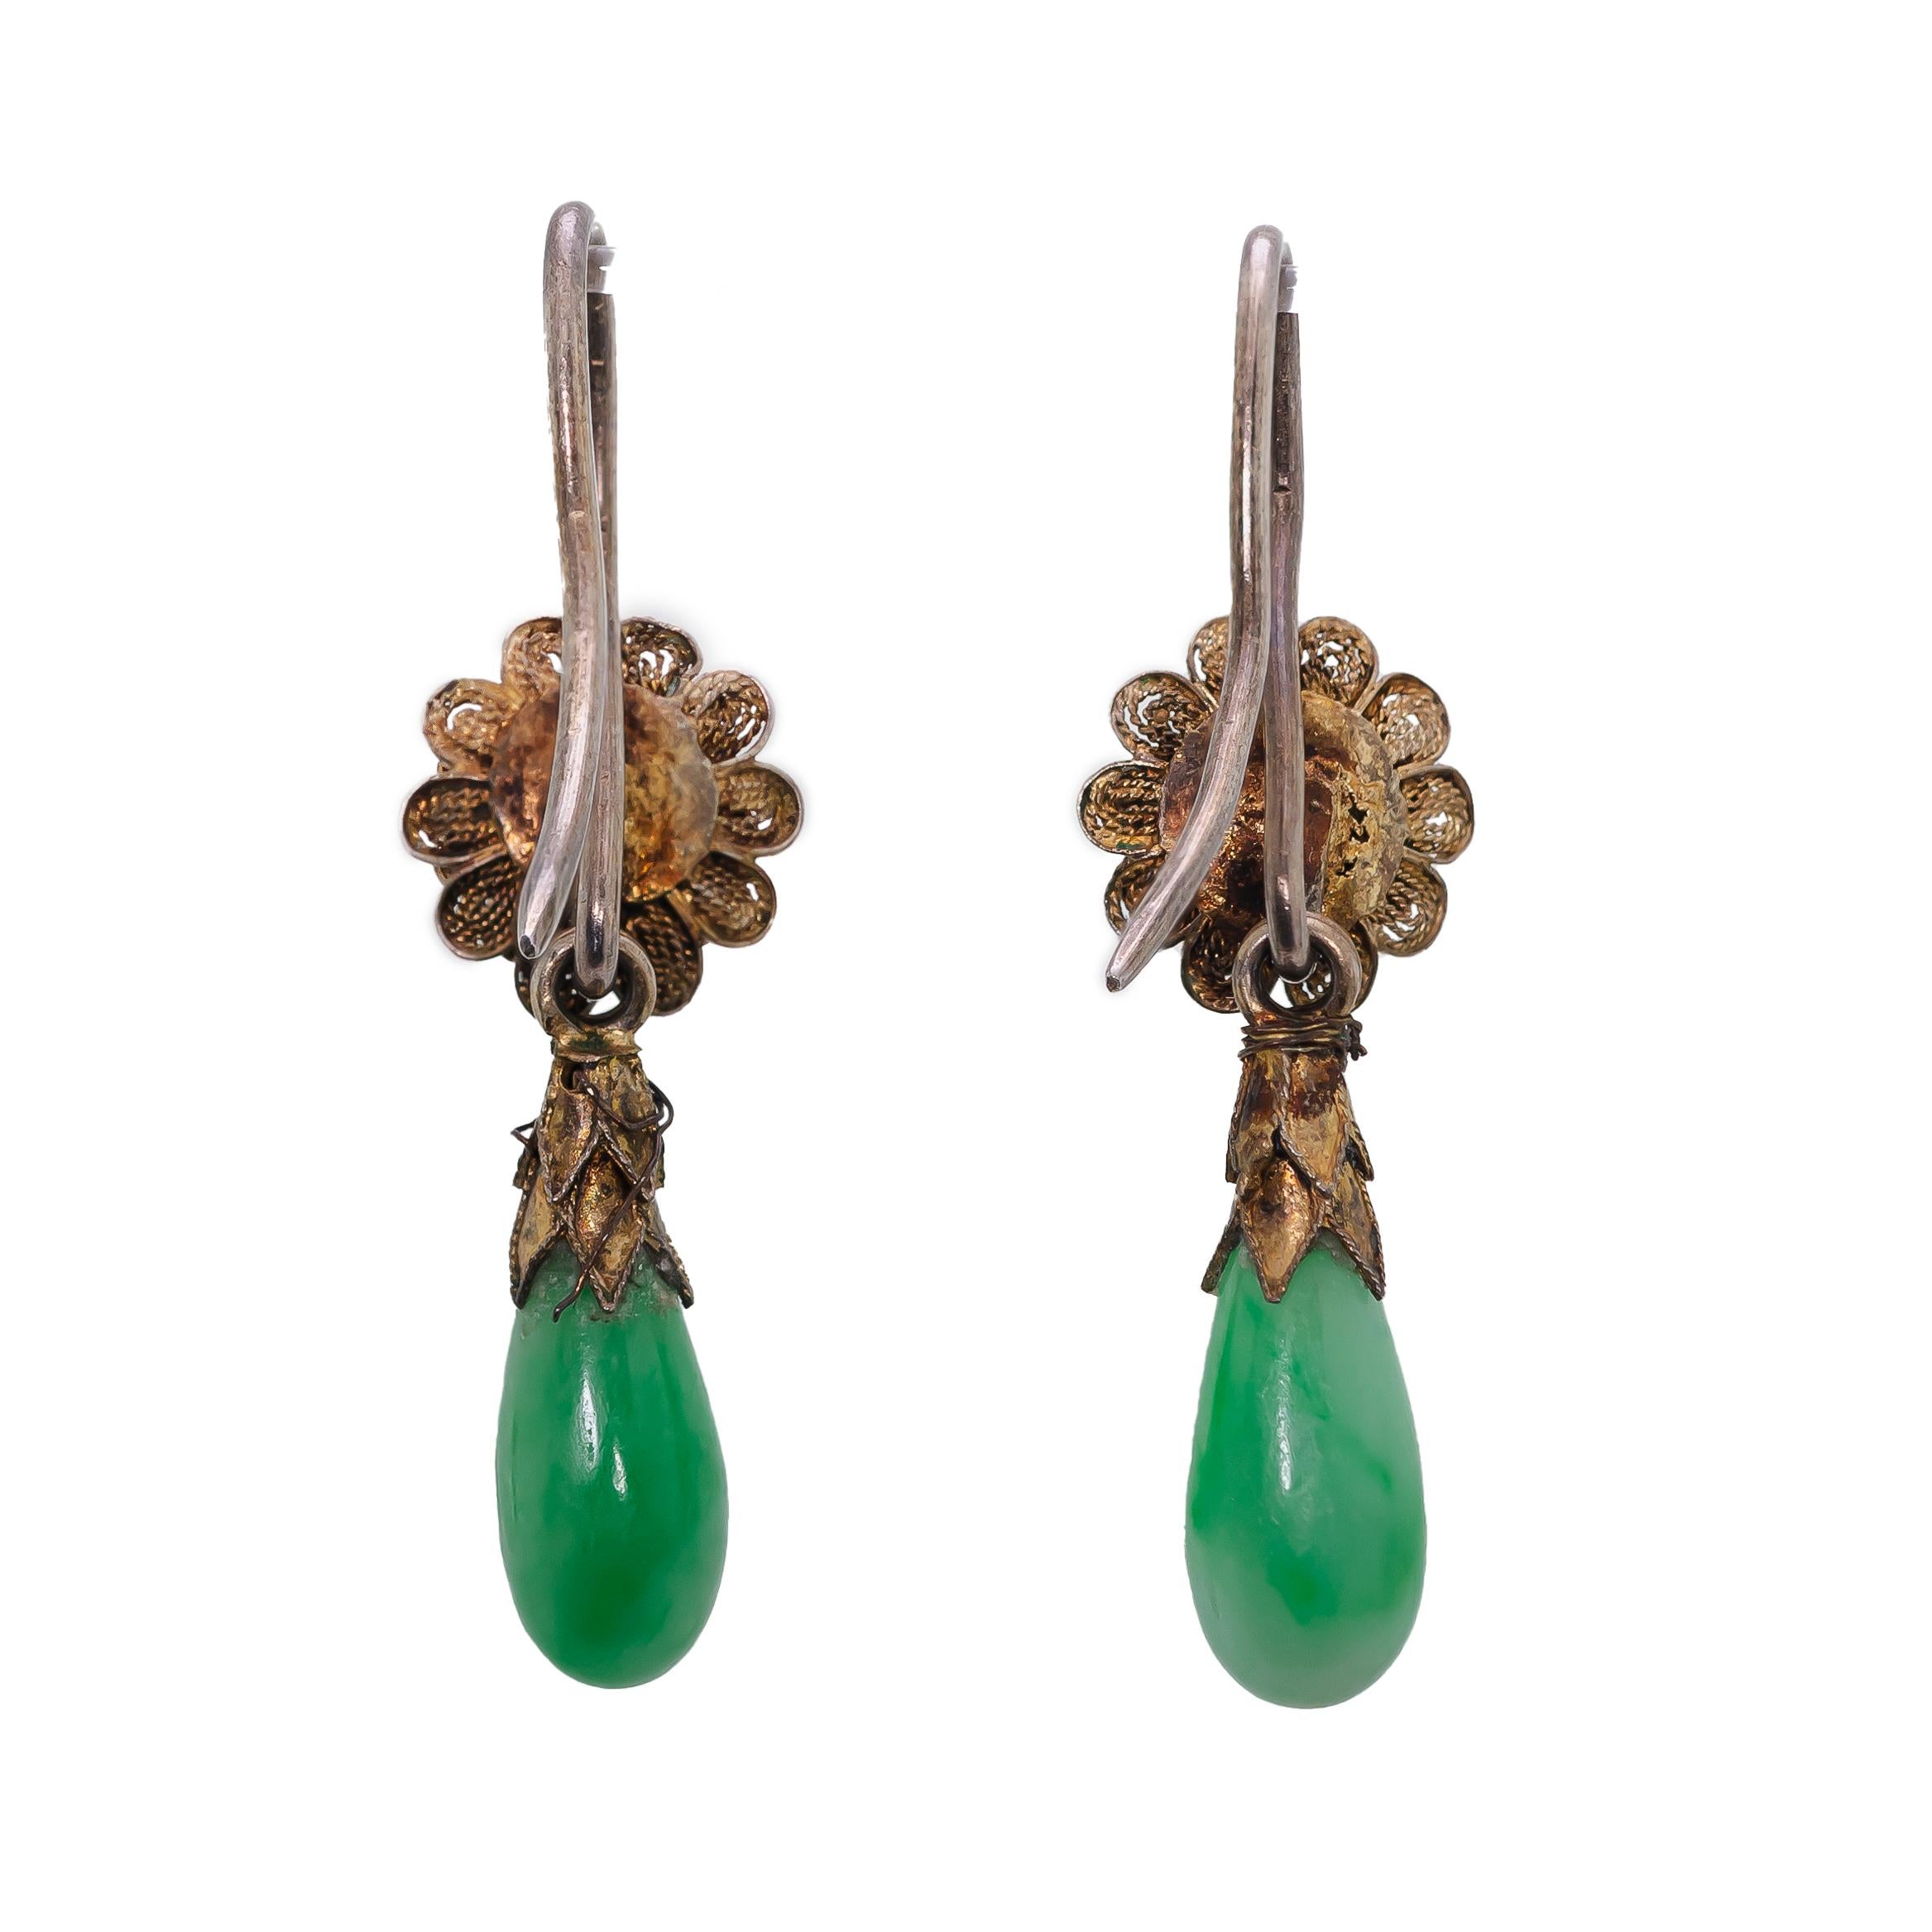 Lovely Vintage Jade and Silver Gilt Earrings In Good Condition For Sale In Wheaton, IL